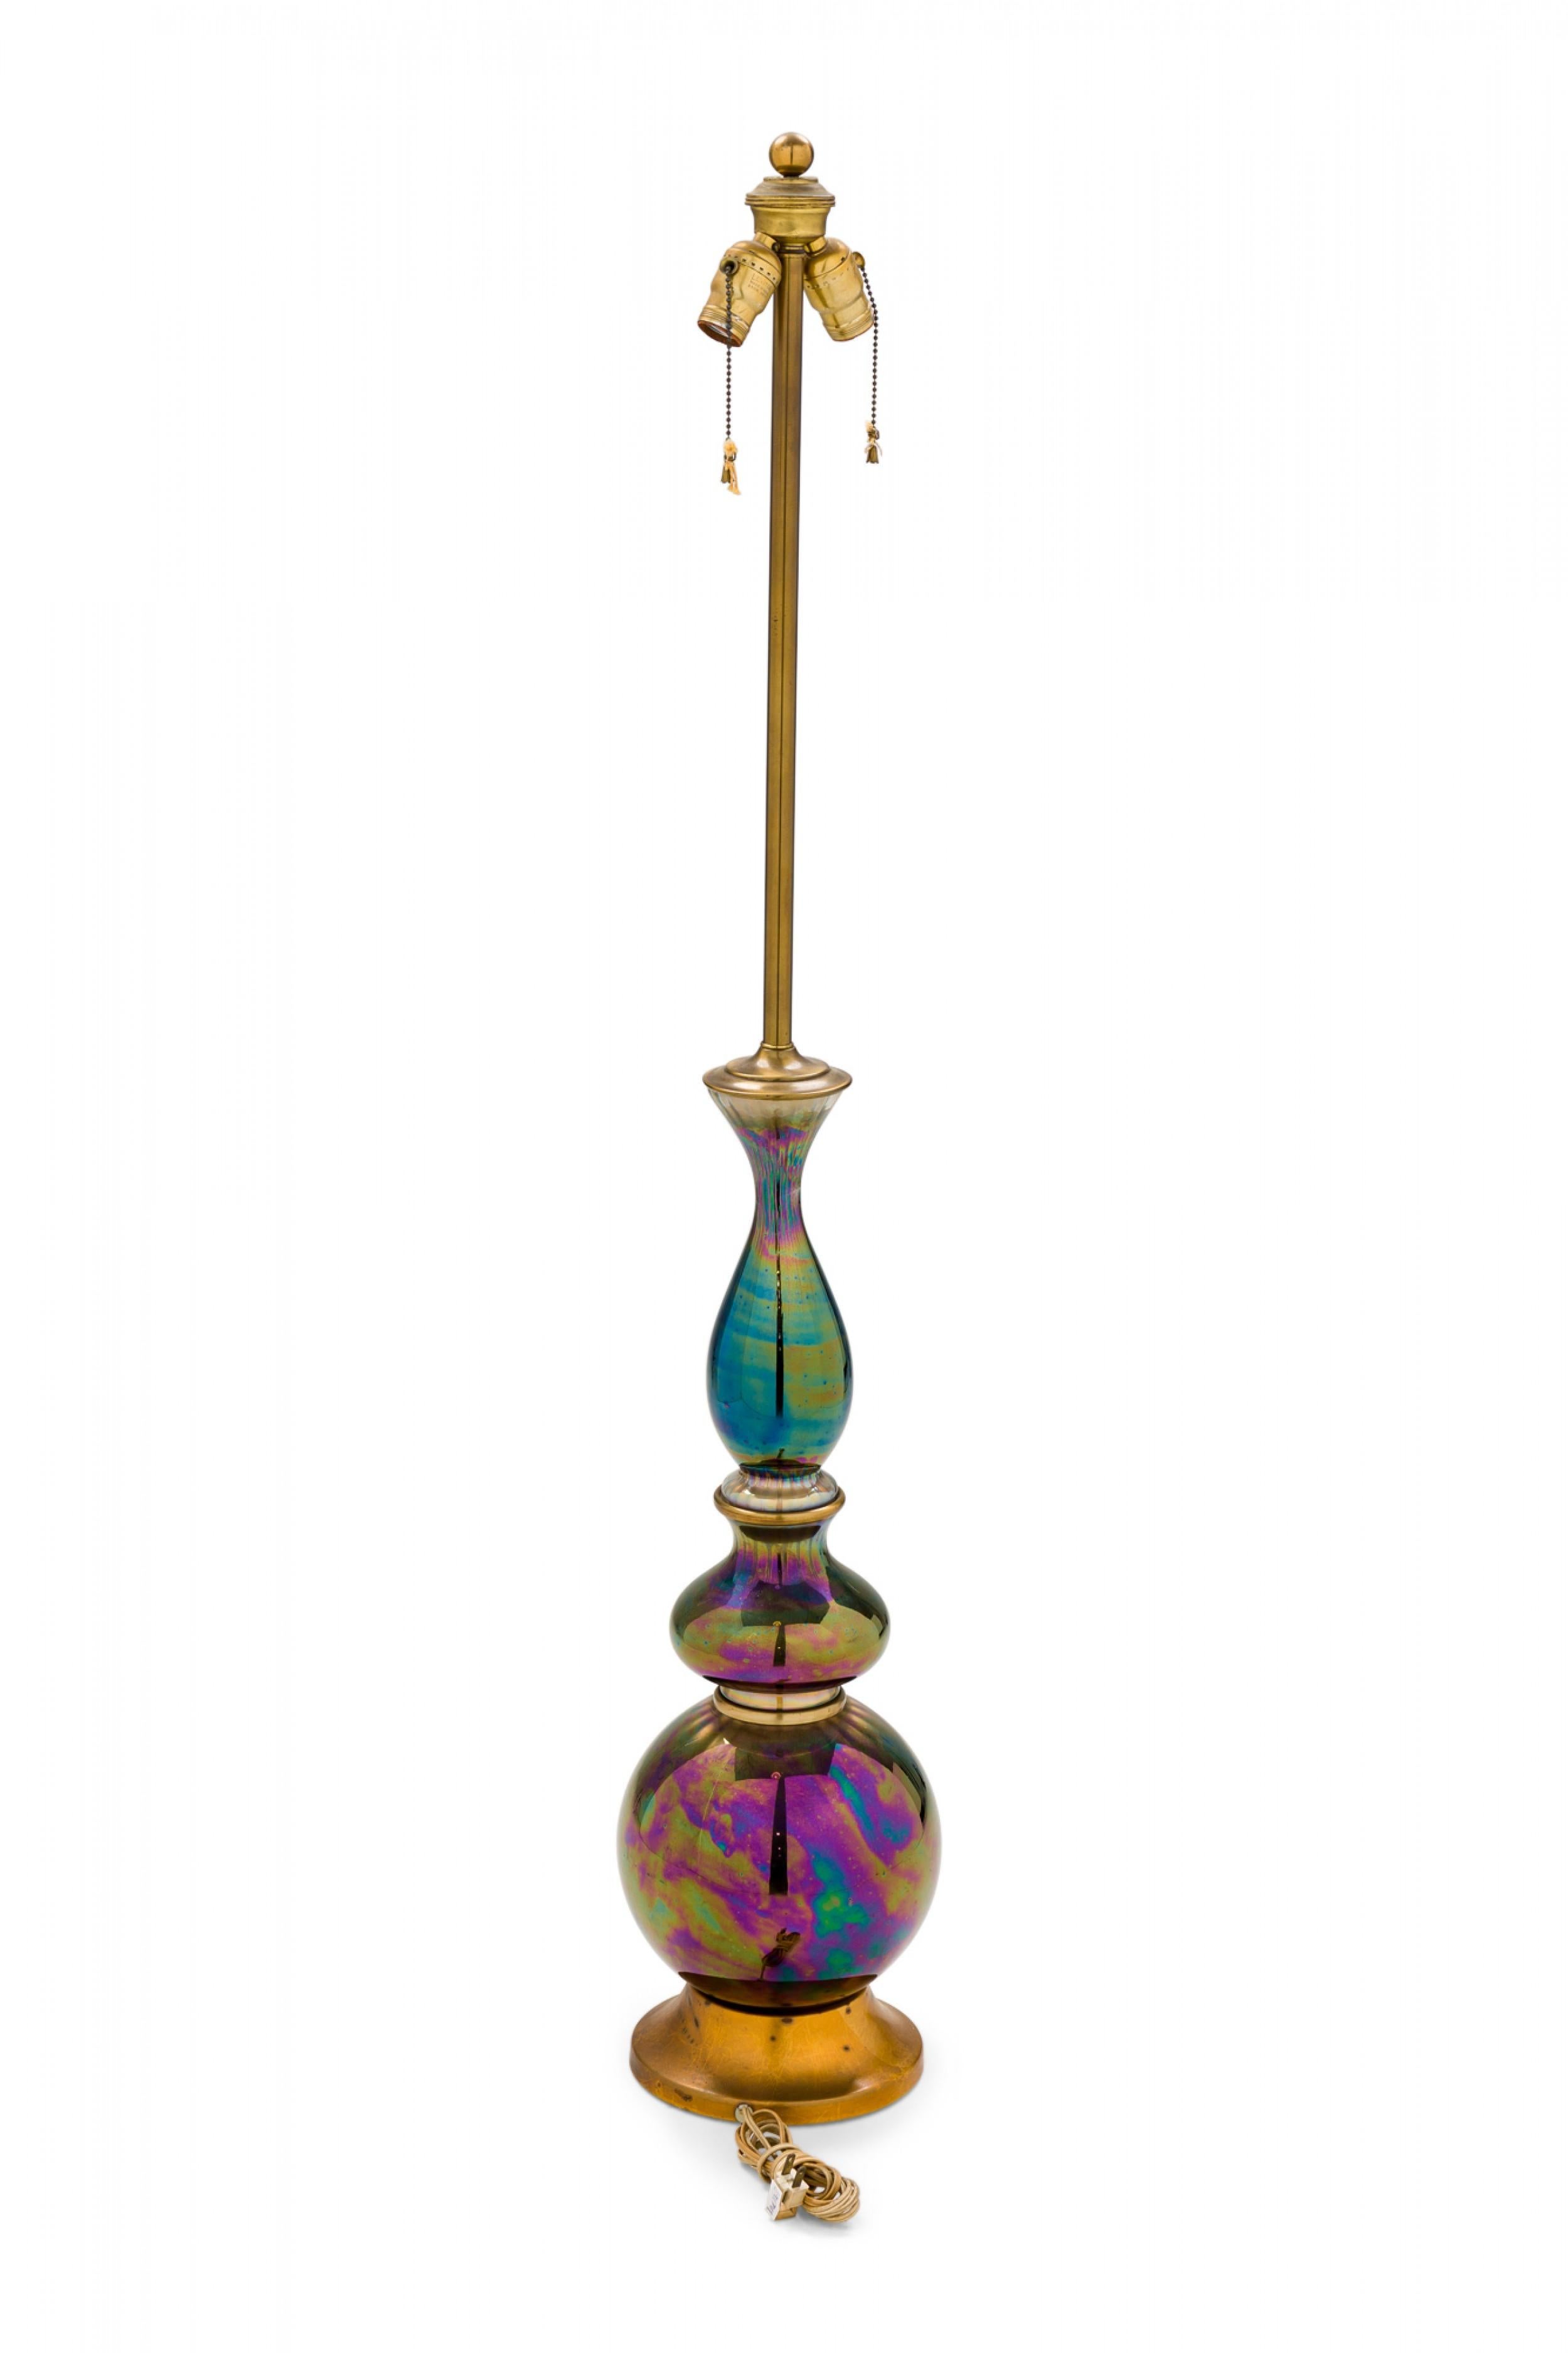 PAIR of Mid-Century (1950s) American iridescent green / blue / purple glass table lamps in spired globular form with towering functional brass light switch sockets plus beaded pulls, mounted on beveled gilt metal concave circular stands. (MARBRO